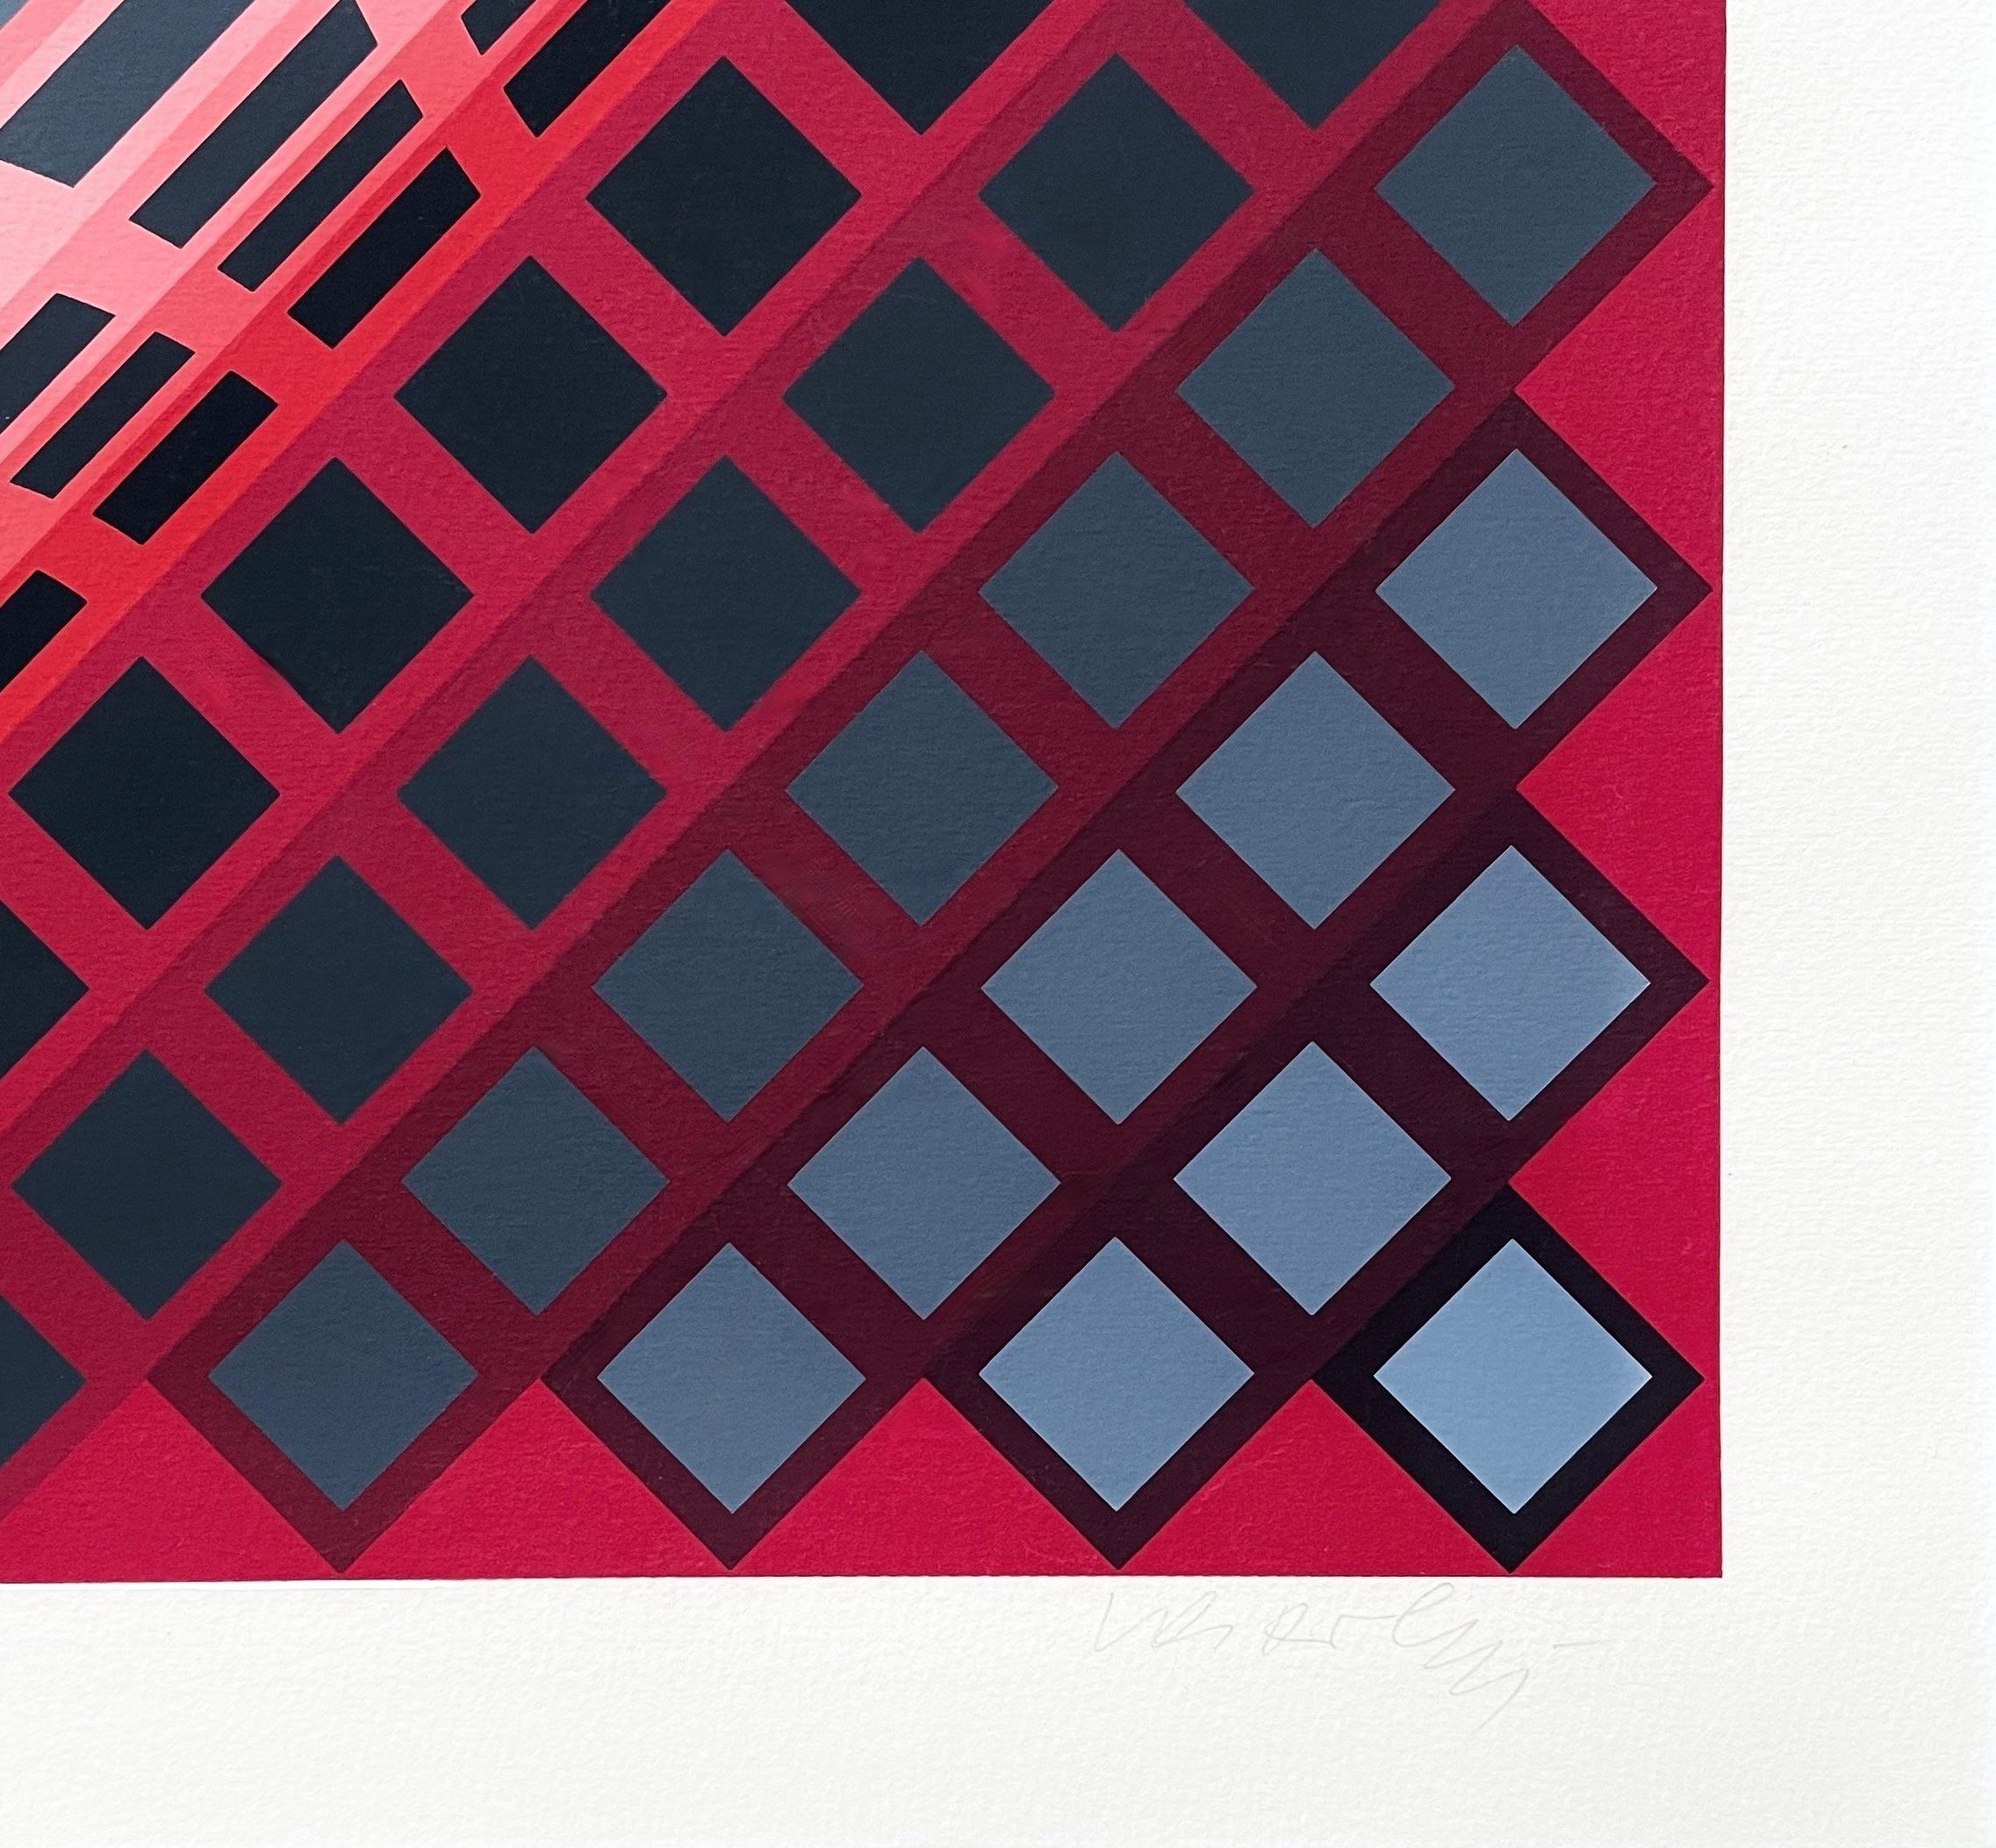 Artist: Victor Vasarely (1908-1997)
Title: Dell-Surk (Benavides 267)
Year: 1975
Medium: Silkscreen on Rives BFK paper
Edition: 24/250, plus proofs
Size: 32.63 x 32.63 inches
Condition: Good
Inscription: Signed and numbered by the artist
Notes: